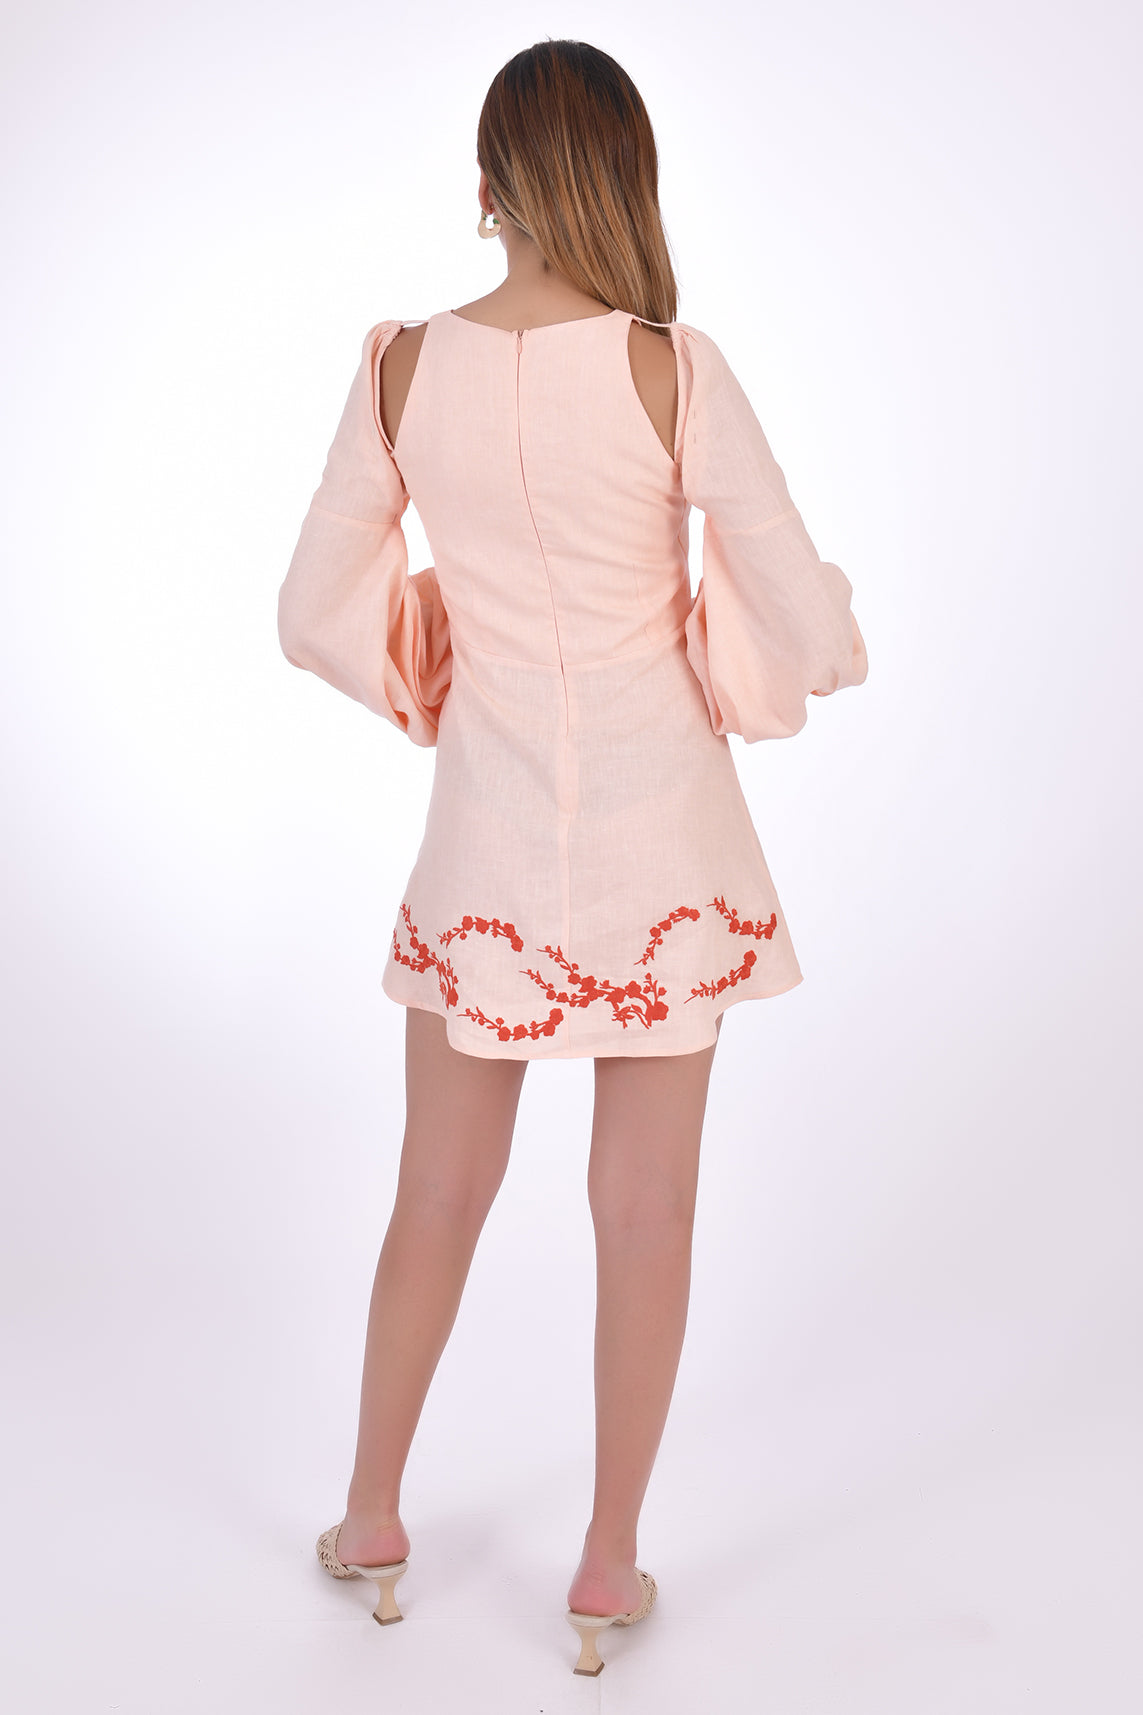 Fanm Mon Gizem Linen Mini Dress, showcasing back view with open shoulder detail and embroidery on hem. 